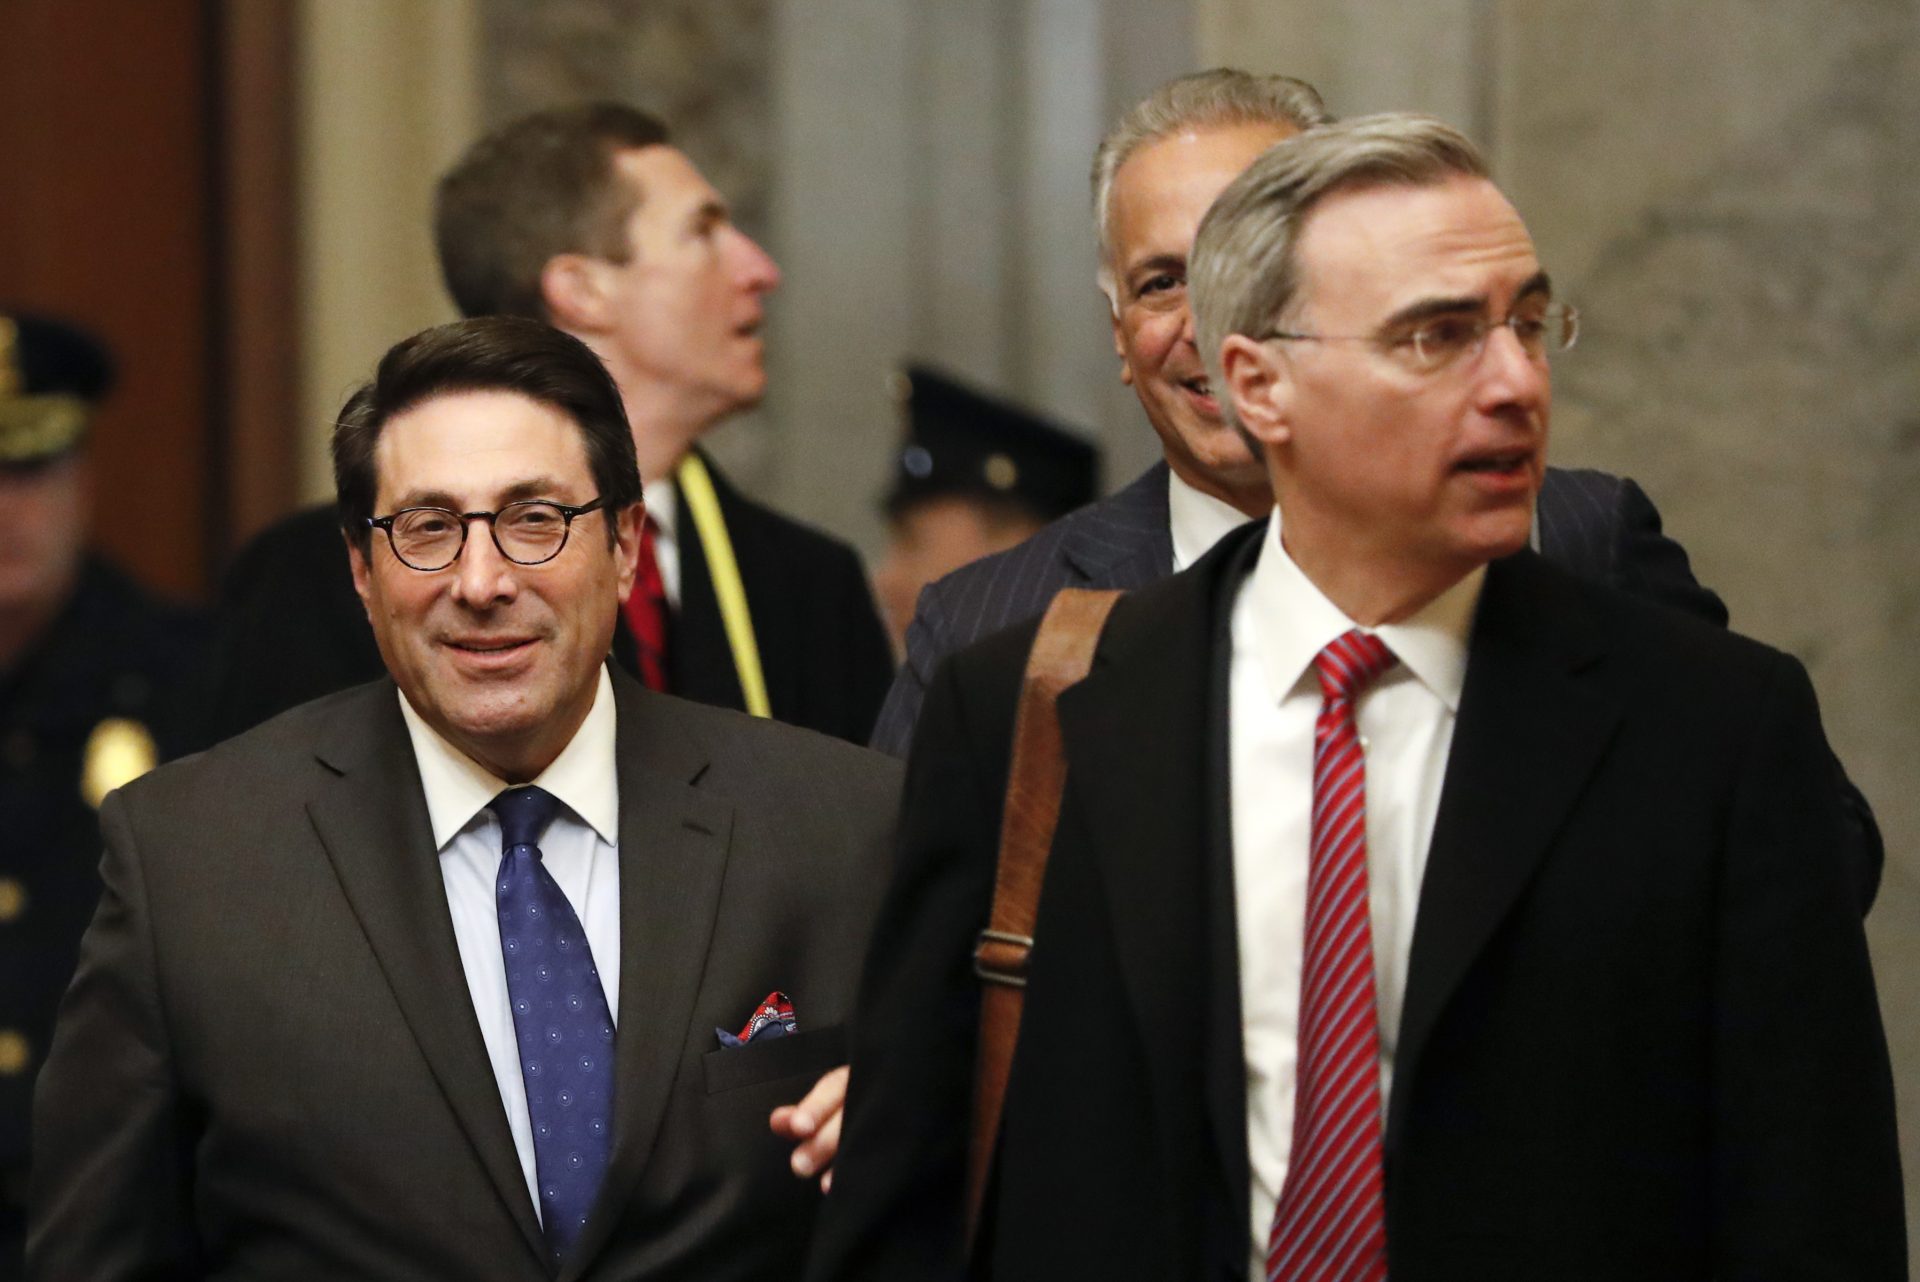 President Donald Trump's personal attorney Jay Sekulow, left, walks with White House Counsel Pat Cipollone, right, as they arrive at the Capitol in Washington during the impeachment trial of President Donald Trump on charges of abuse of power and obstruction of Congress, Friday, Jan. 24, 2020.